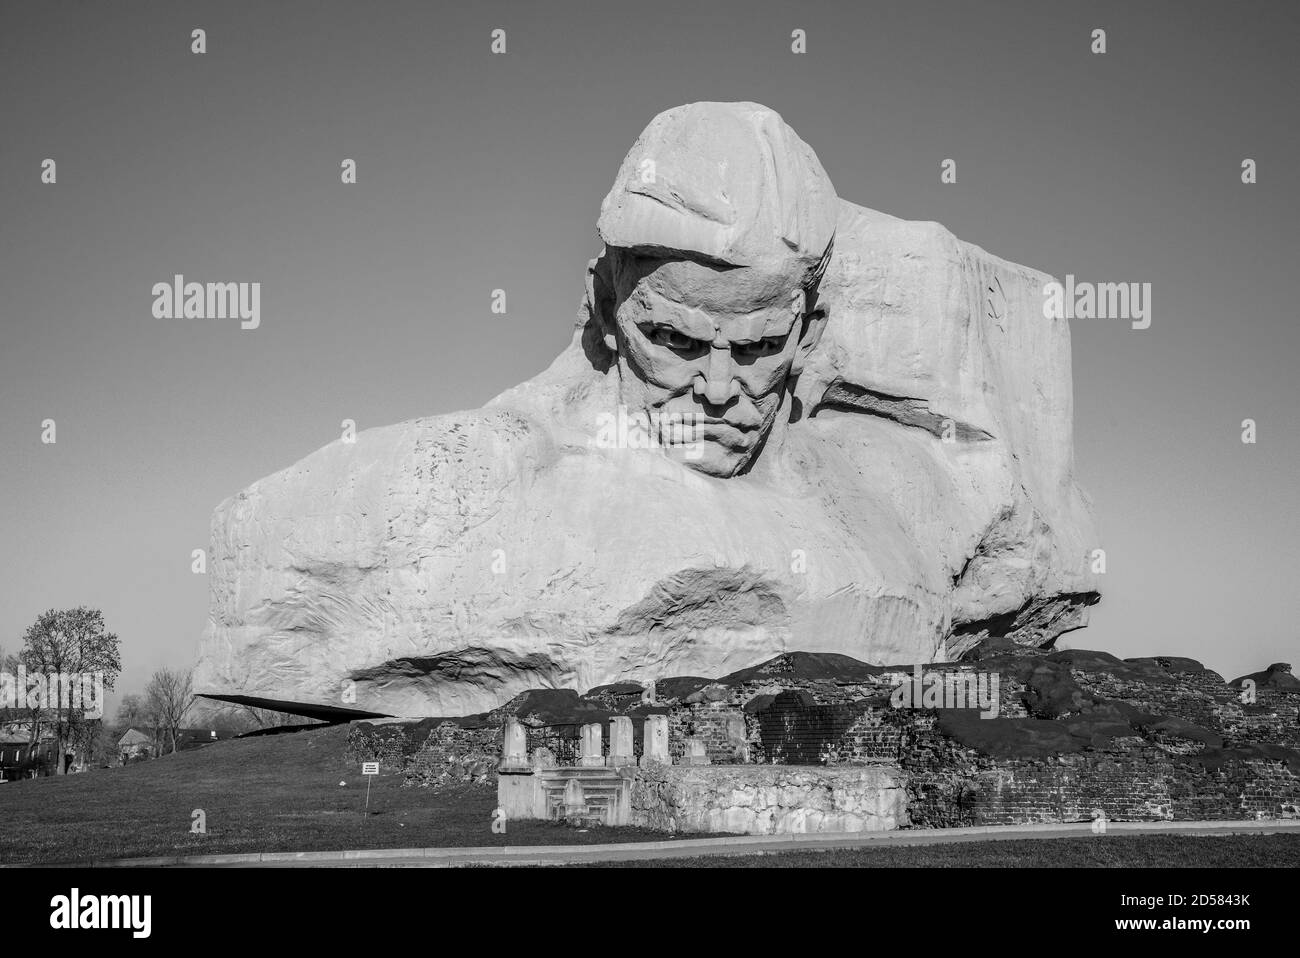 BREST, BELARUS - MARCH 24, 2016: The main monument of Brest Fortress Memorial Stock Photo